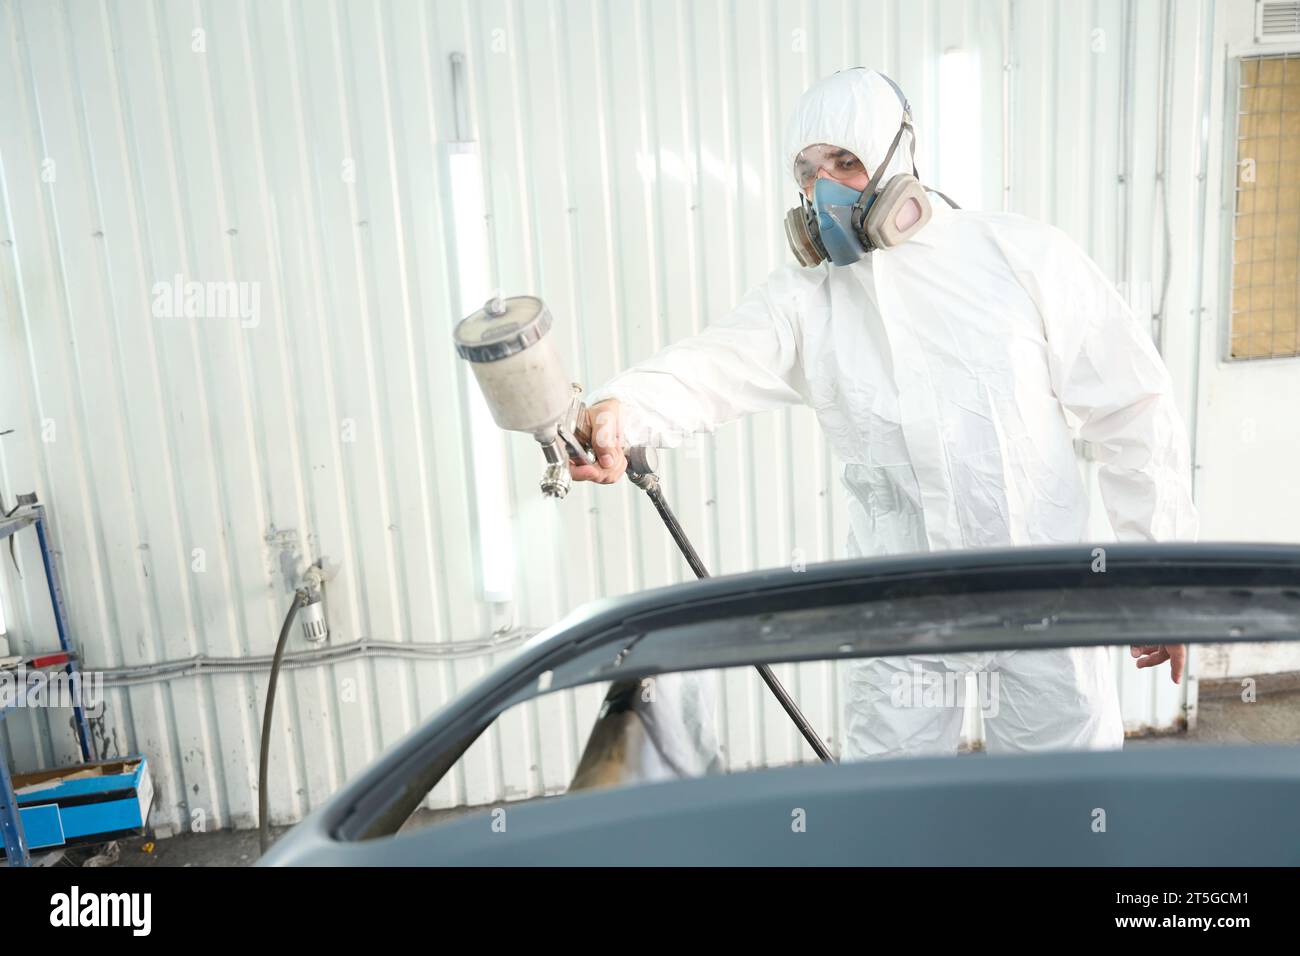 Skilled auto repair shop worker is painting motor vehicle body panel Stock Photo